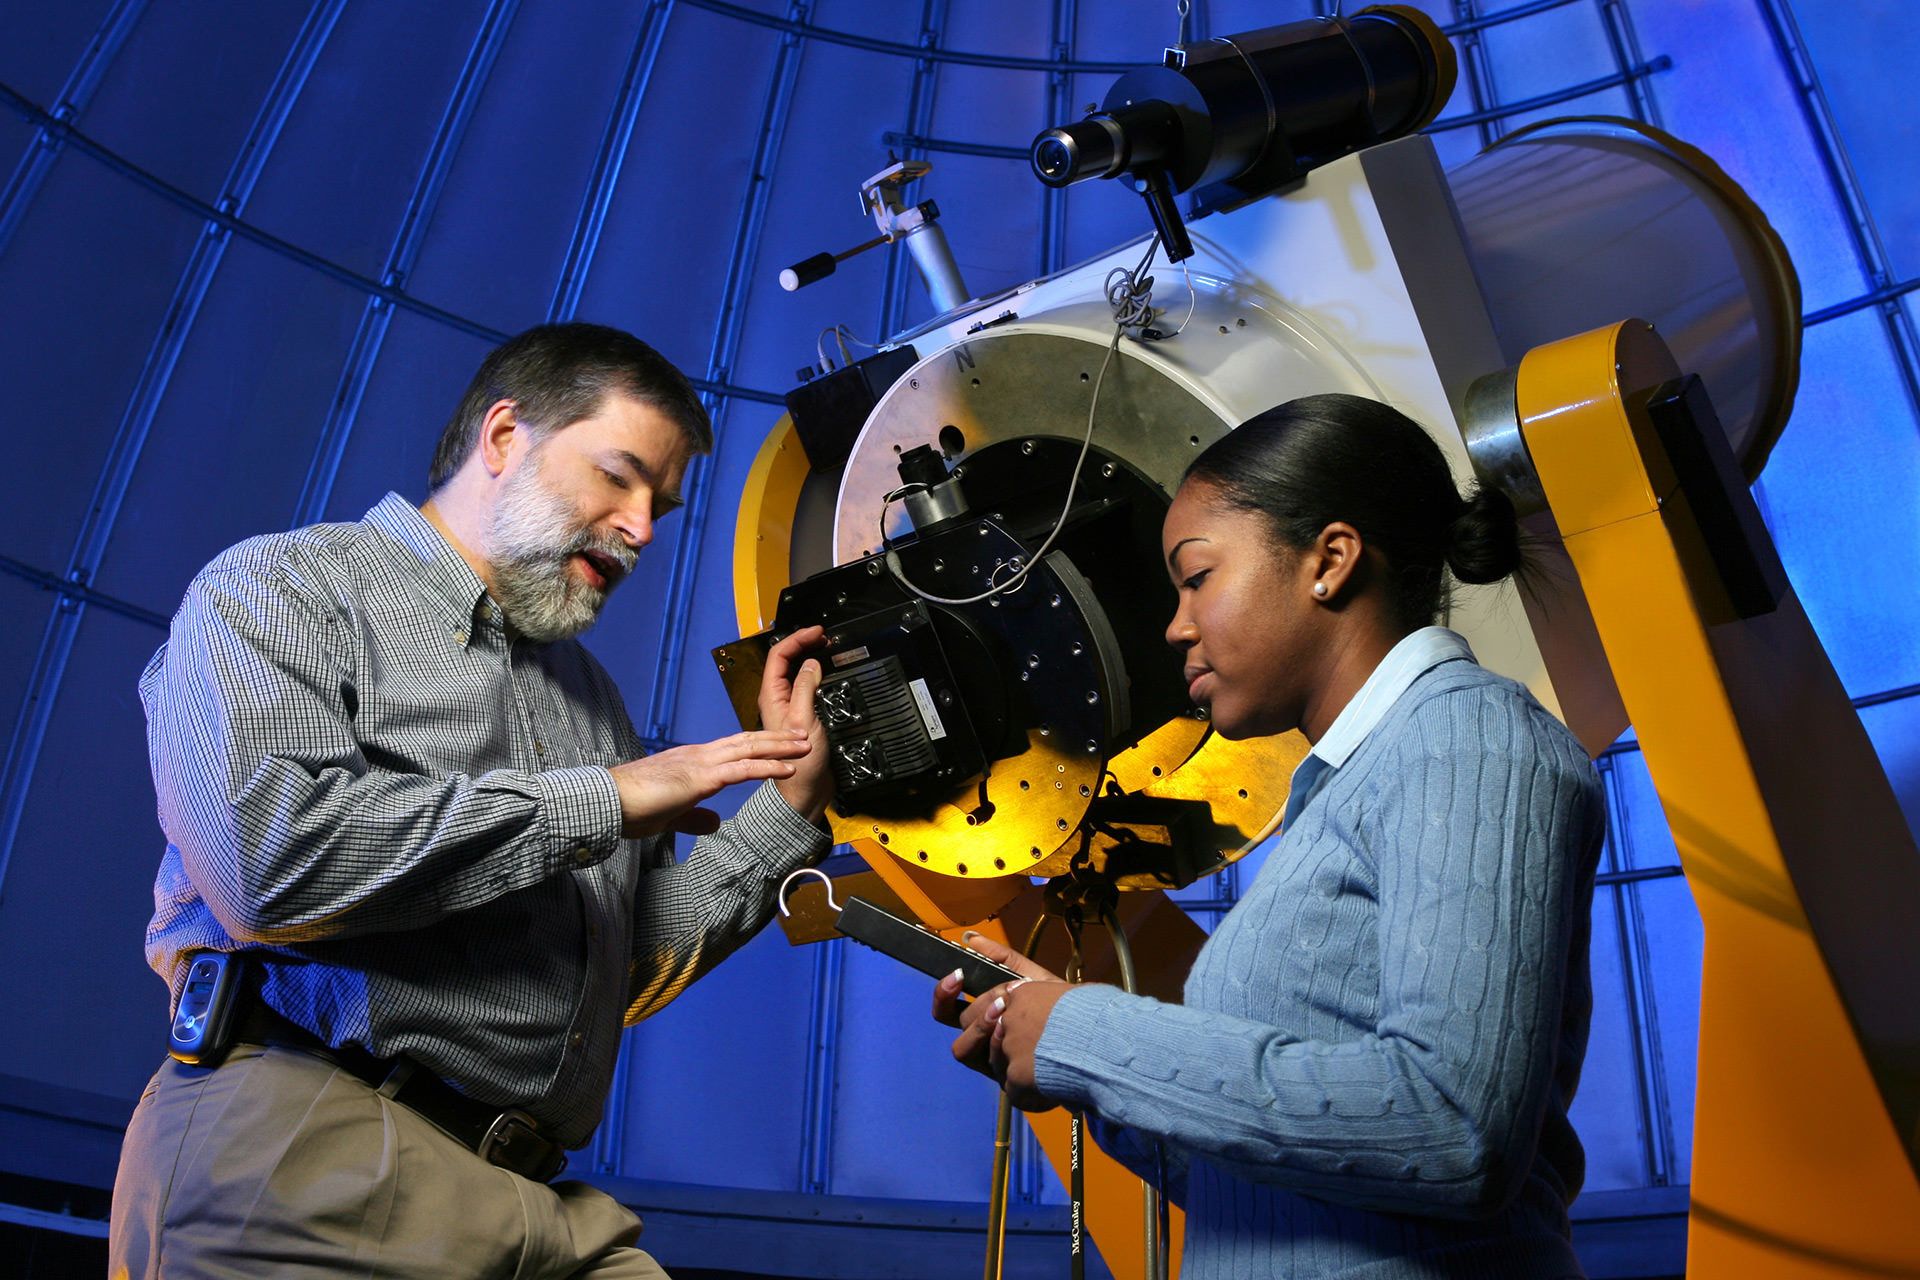 Dr. John Laird and student with the planetarium telescope